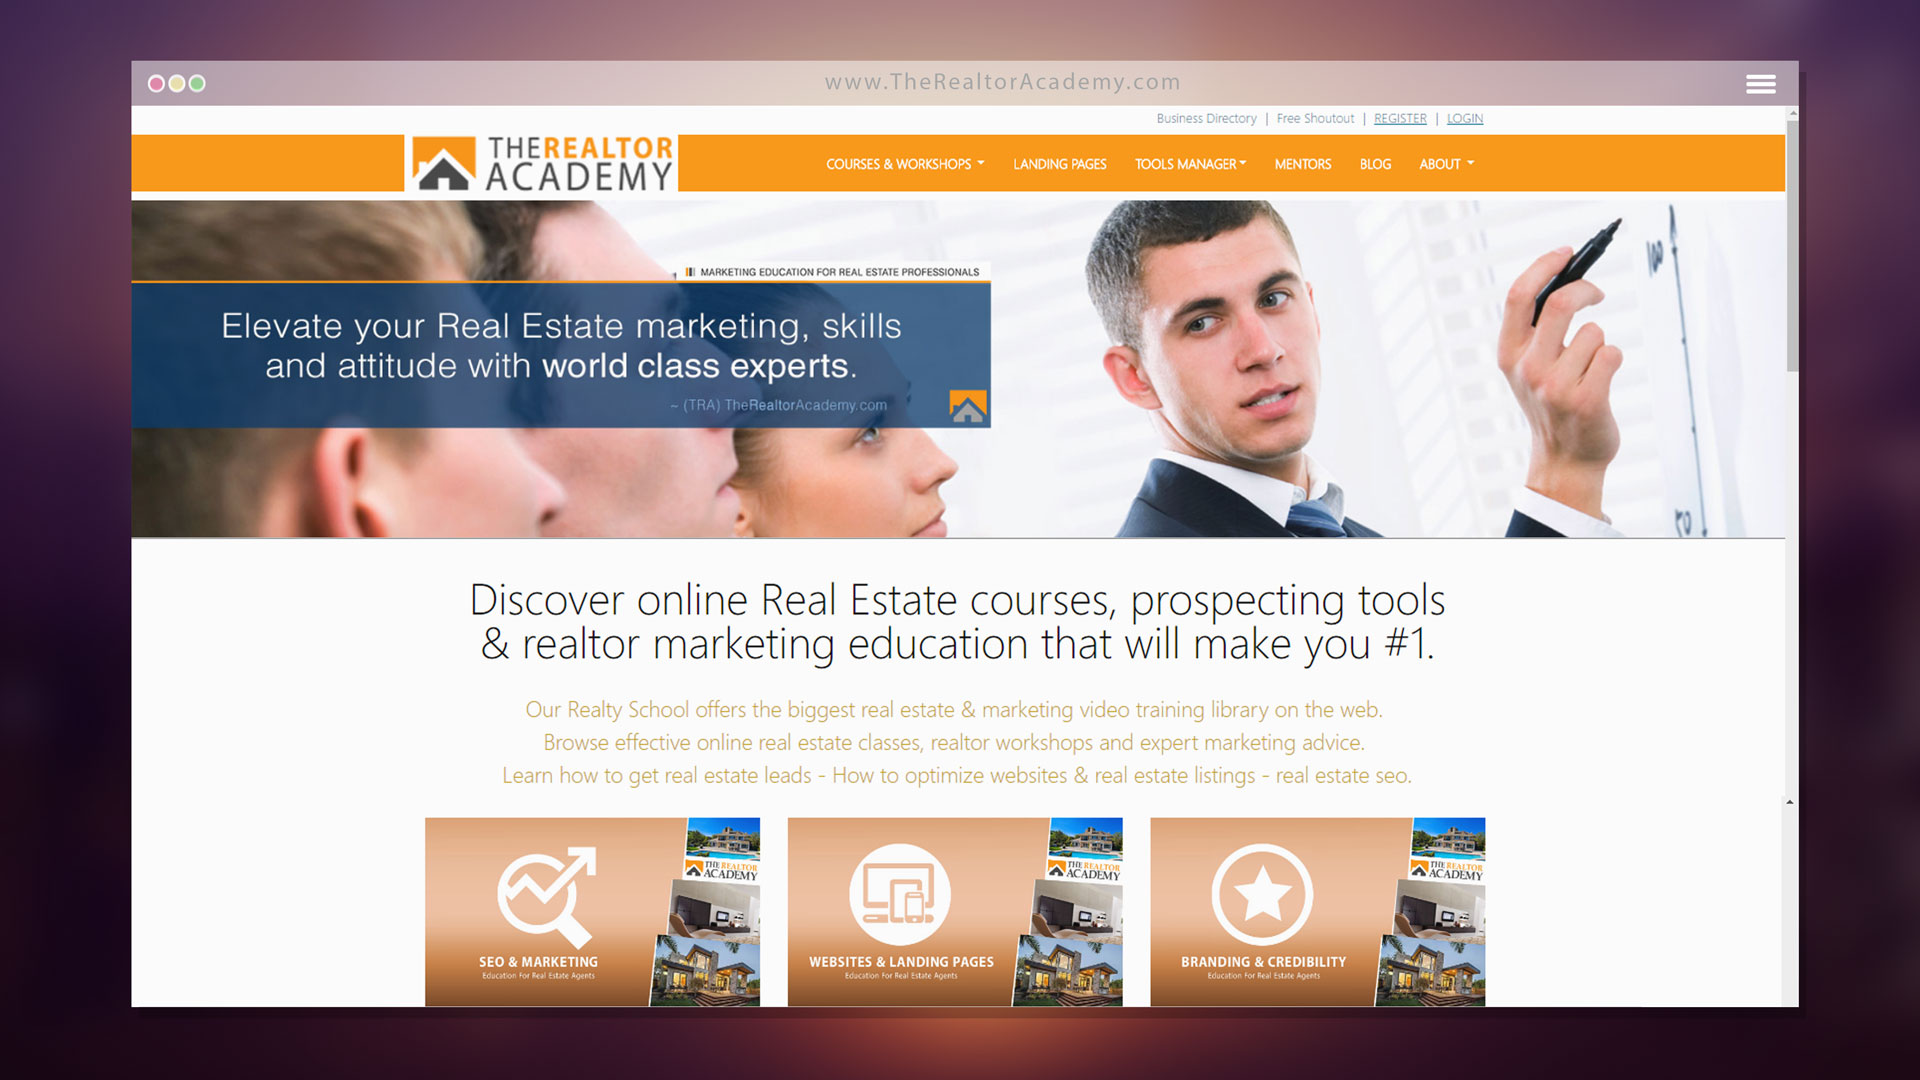 The Realtor Academy - Resource / Directory / Education  CMS / CRM for Real Estate Professionals - Powered by Web Development Company The Logic Box